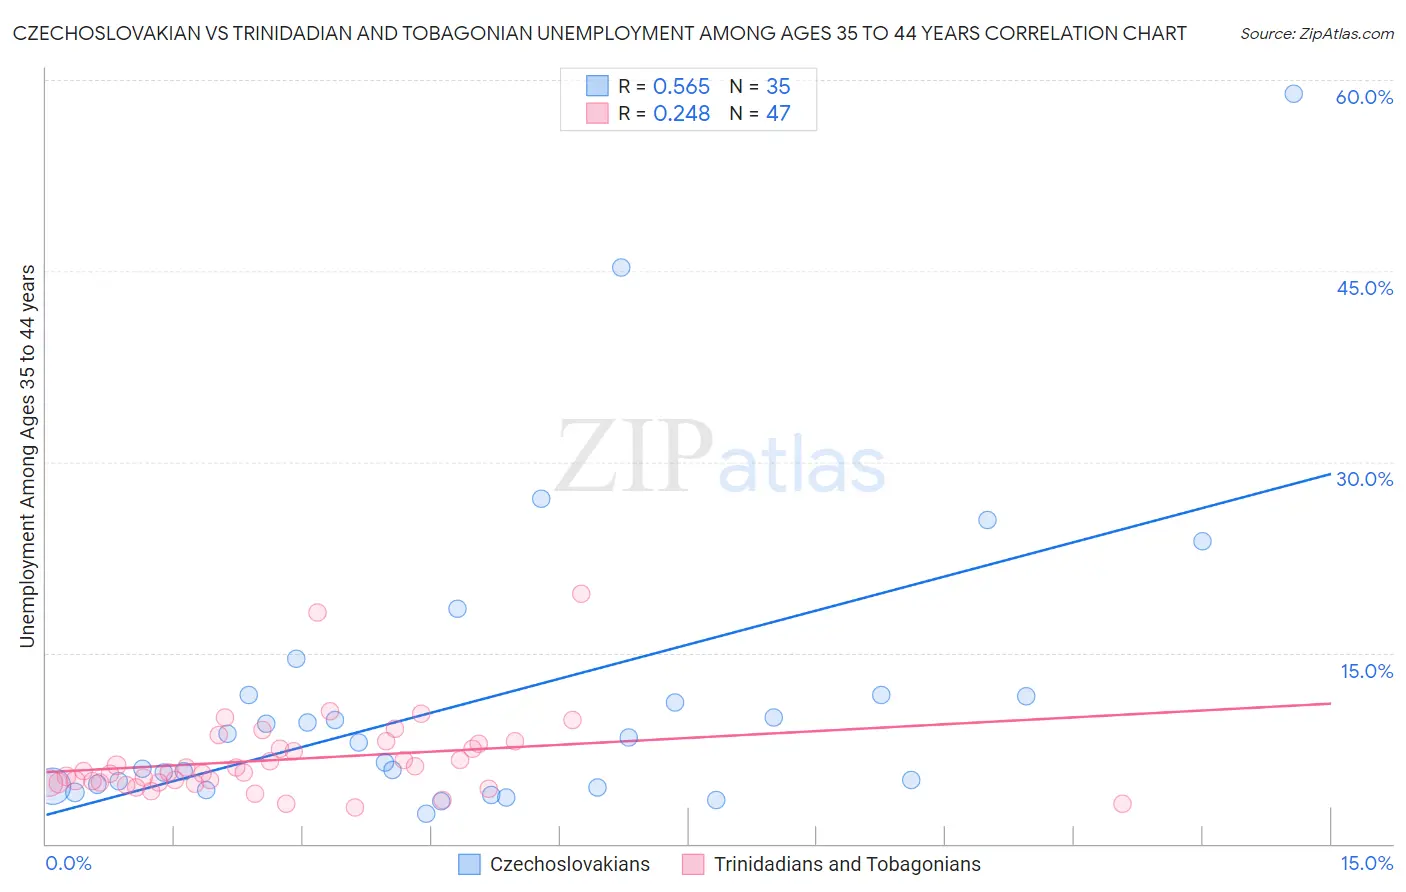 Czechoslovakian vs Trinidadian and Tobagonian Unemployment Among Ages 35 to 44 years